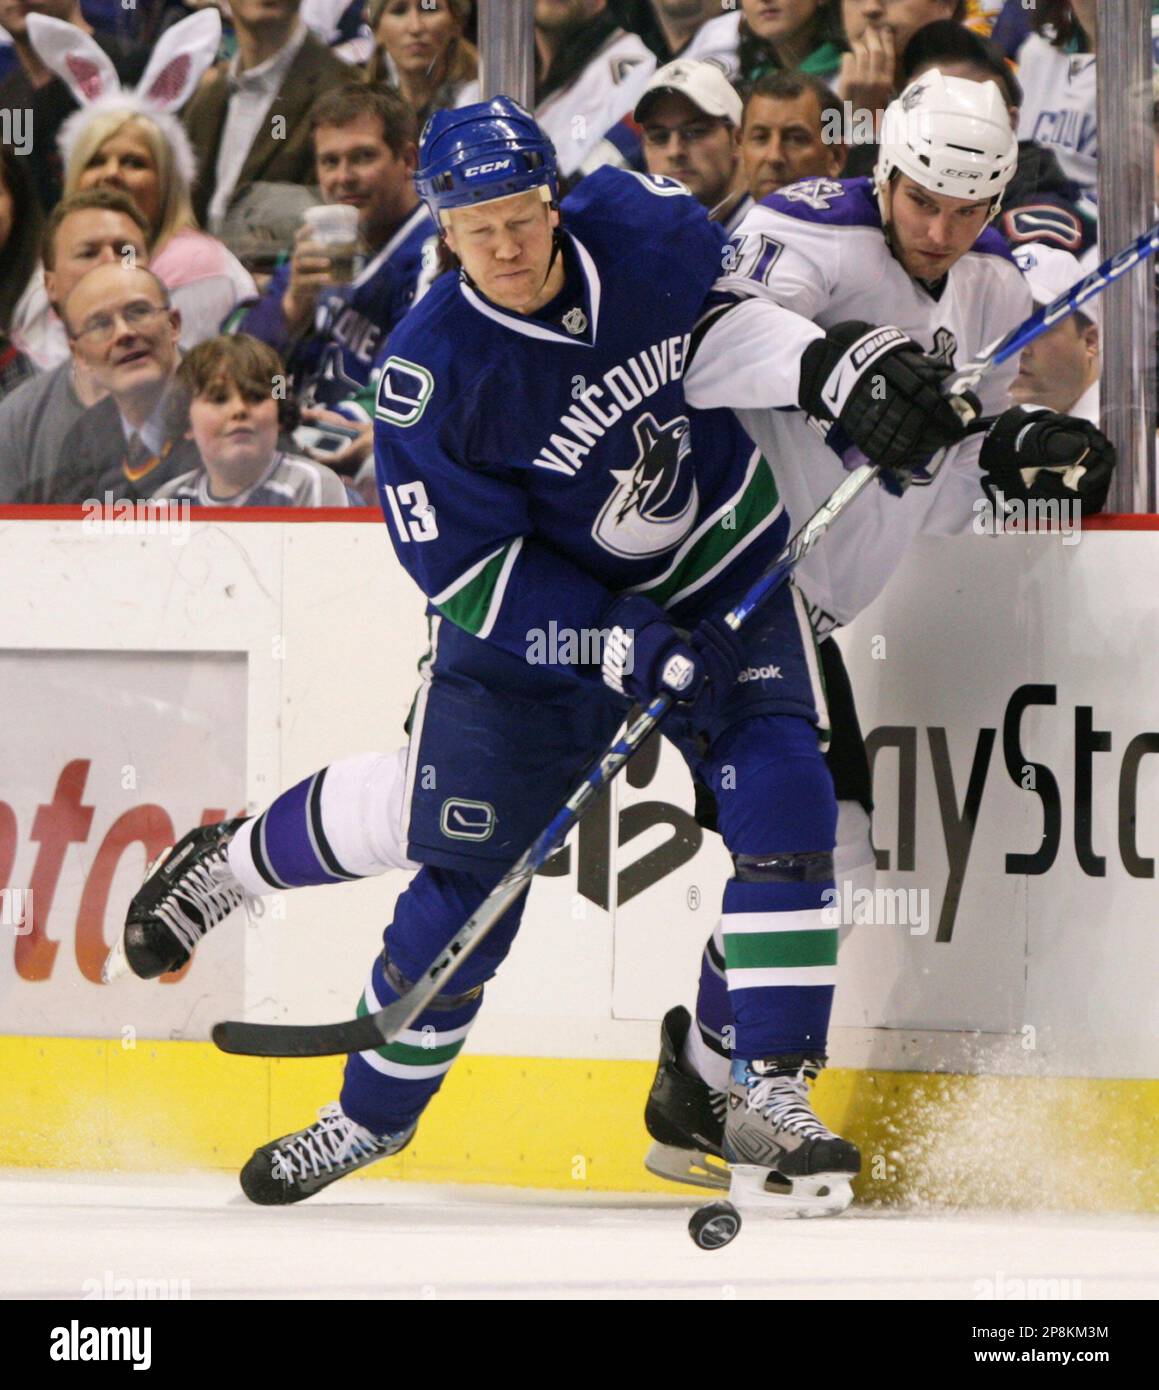 Vancouver Canucks' Mats Sundin, left, of Sweden, checks Los Angeles Kings'  Raitis Ivanans, of Latvia, during the first period of an NHL hockey game in  Vancouver, B.C., on Thursday, April 9, 2009. (